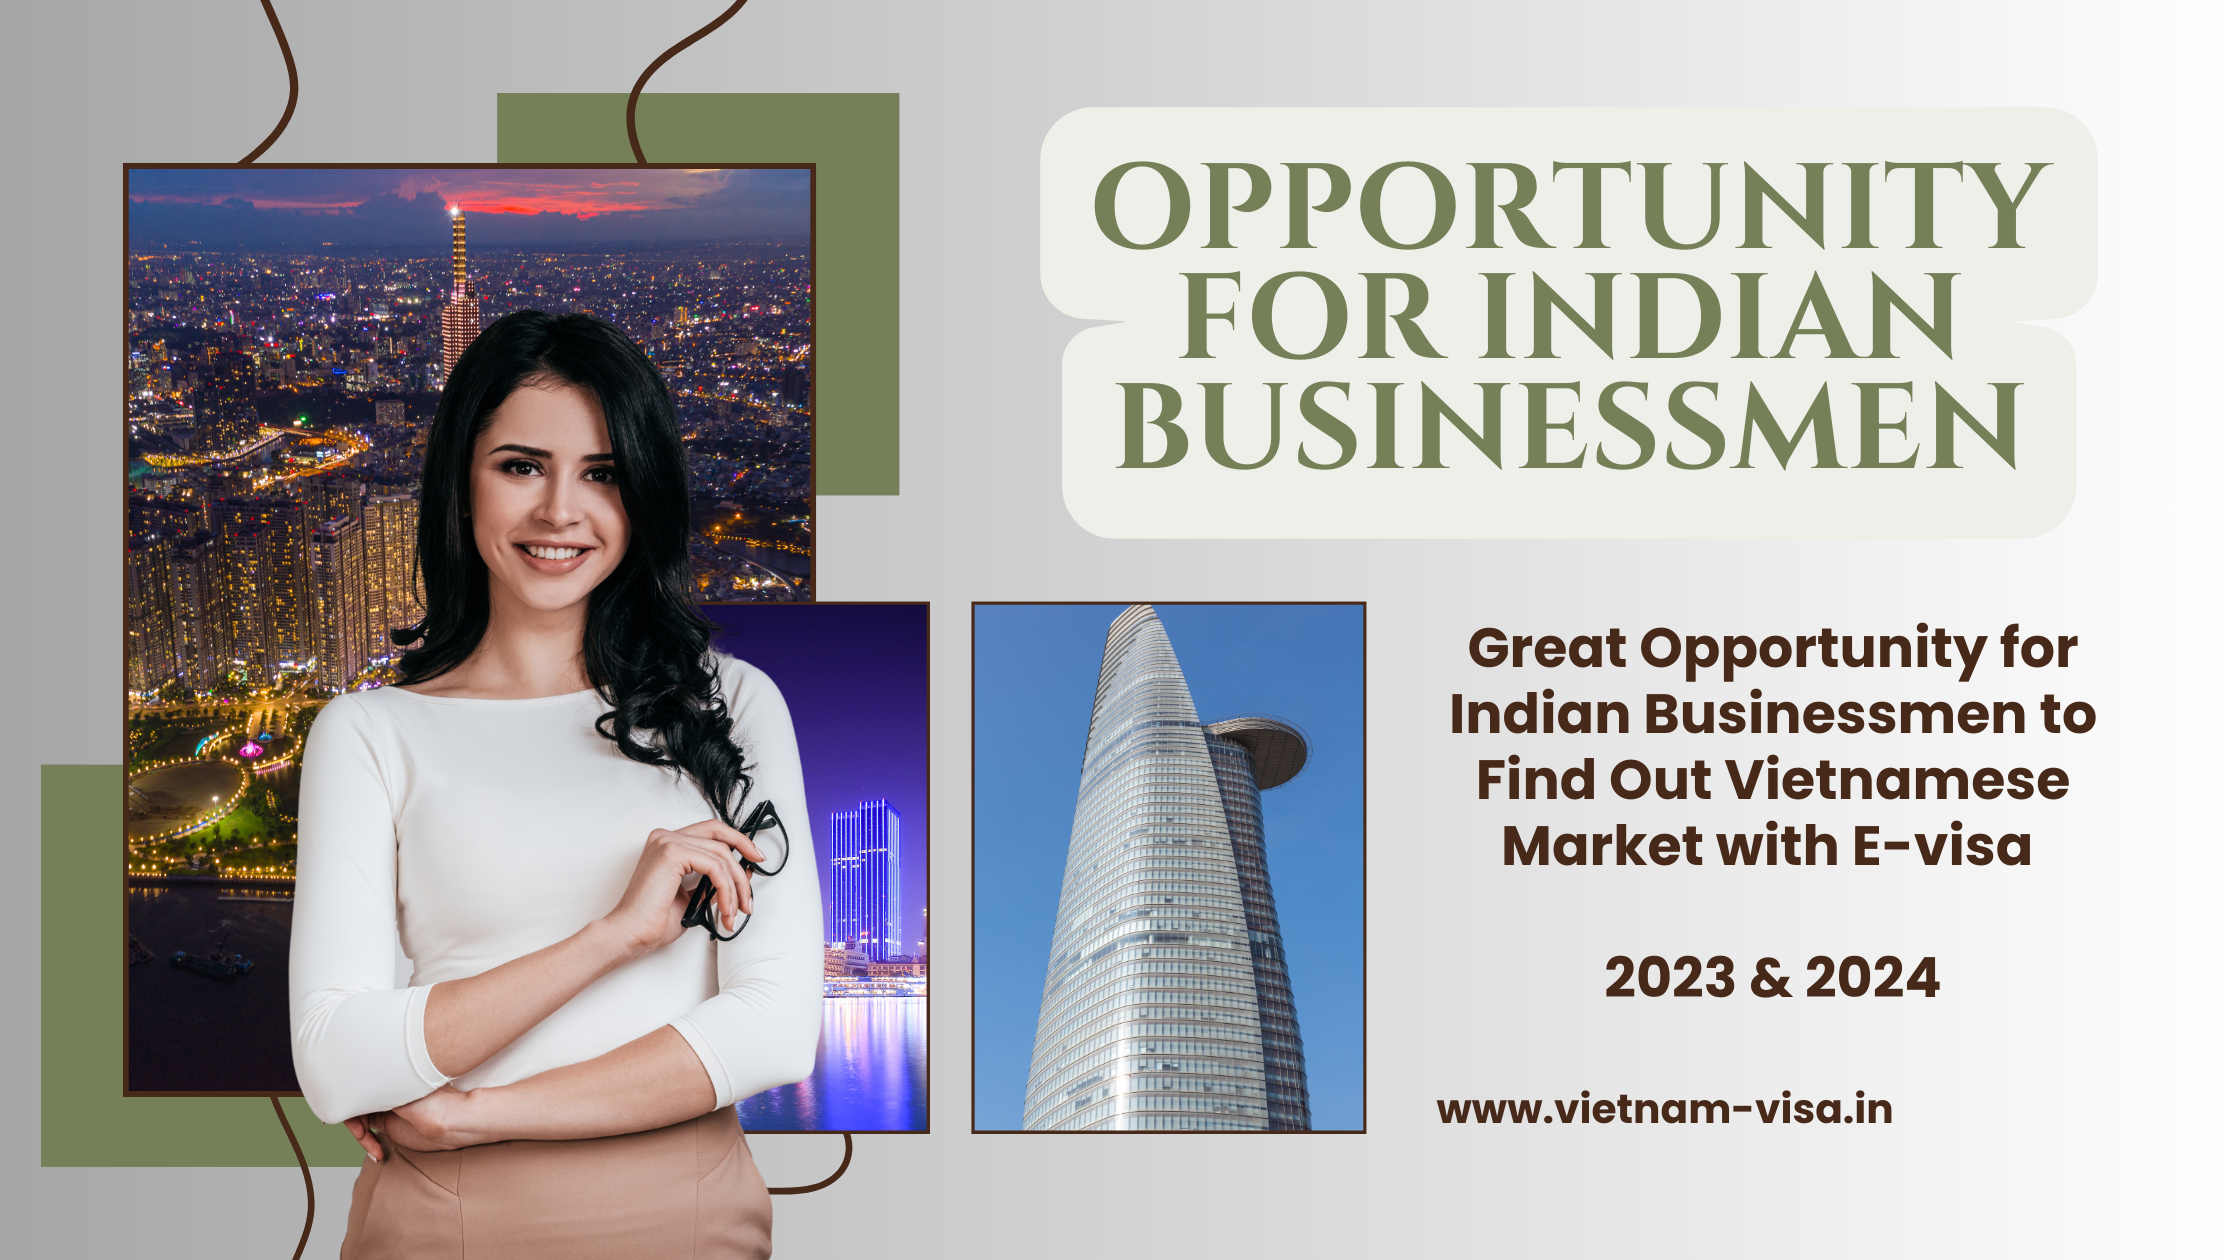 Great Opportunity for Indian Businessmen to Find Out Vietnamese Market with E-visa